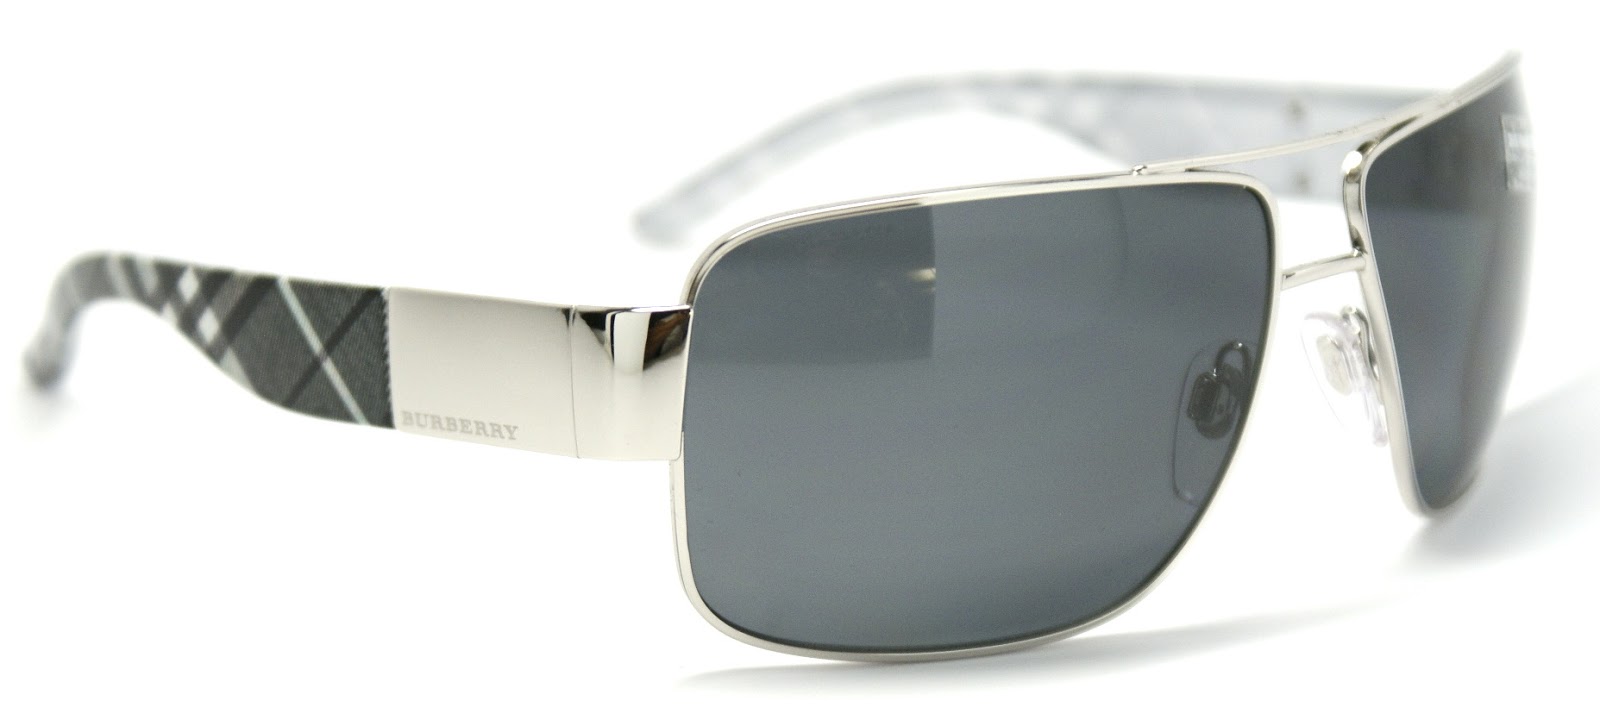 burberry be3040